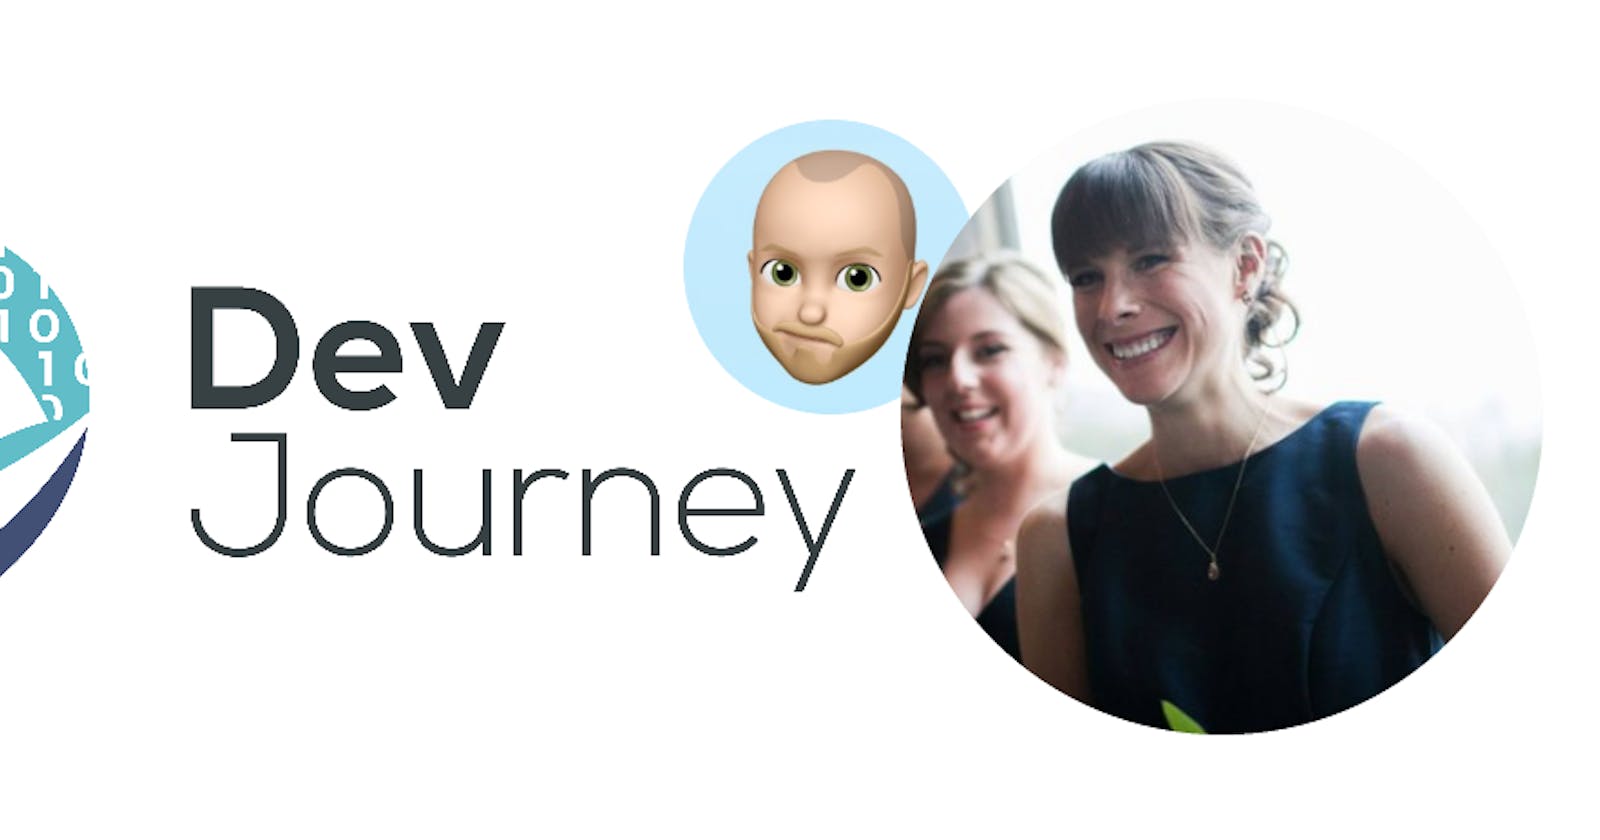 Molly Struve had a long winding journey to SRE... and other things I learned recording her DevJourney